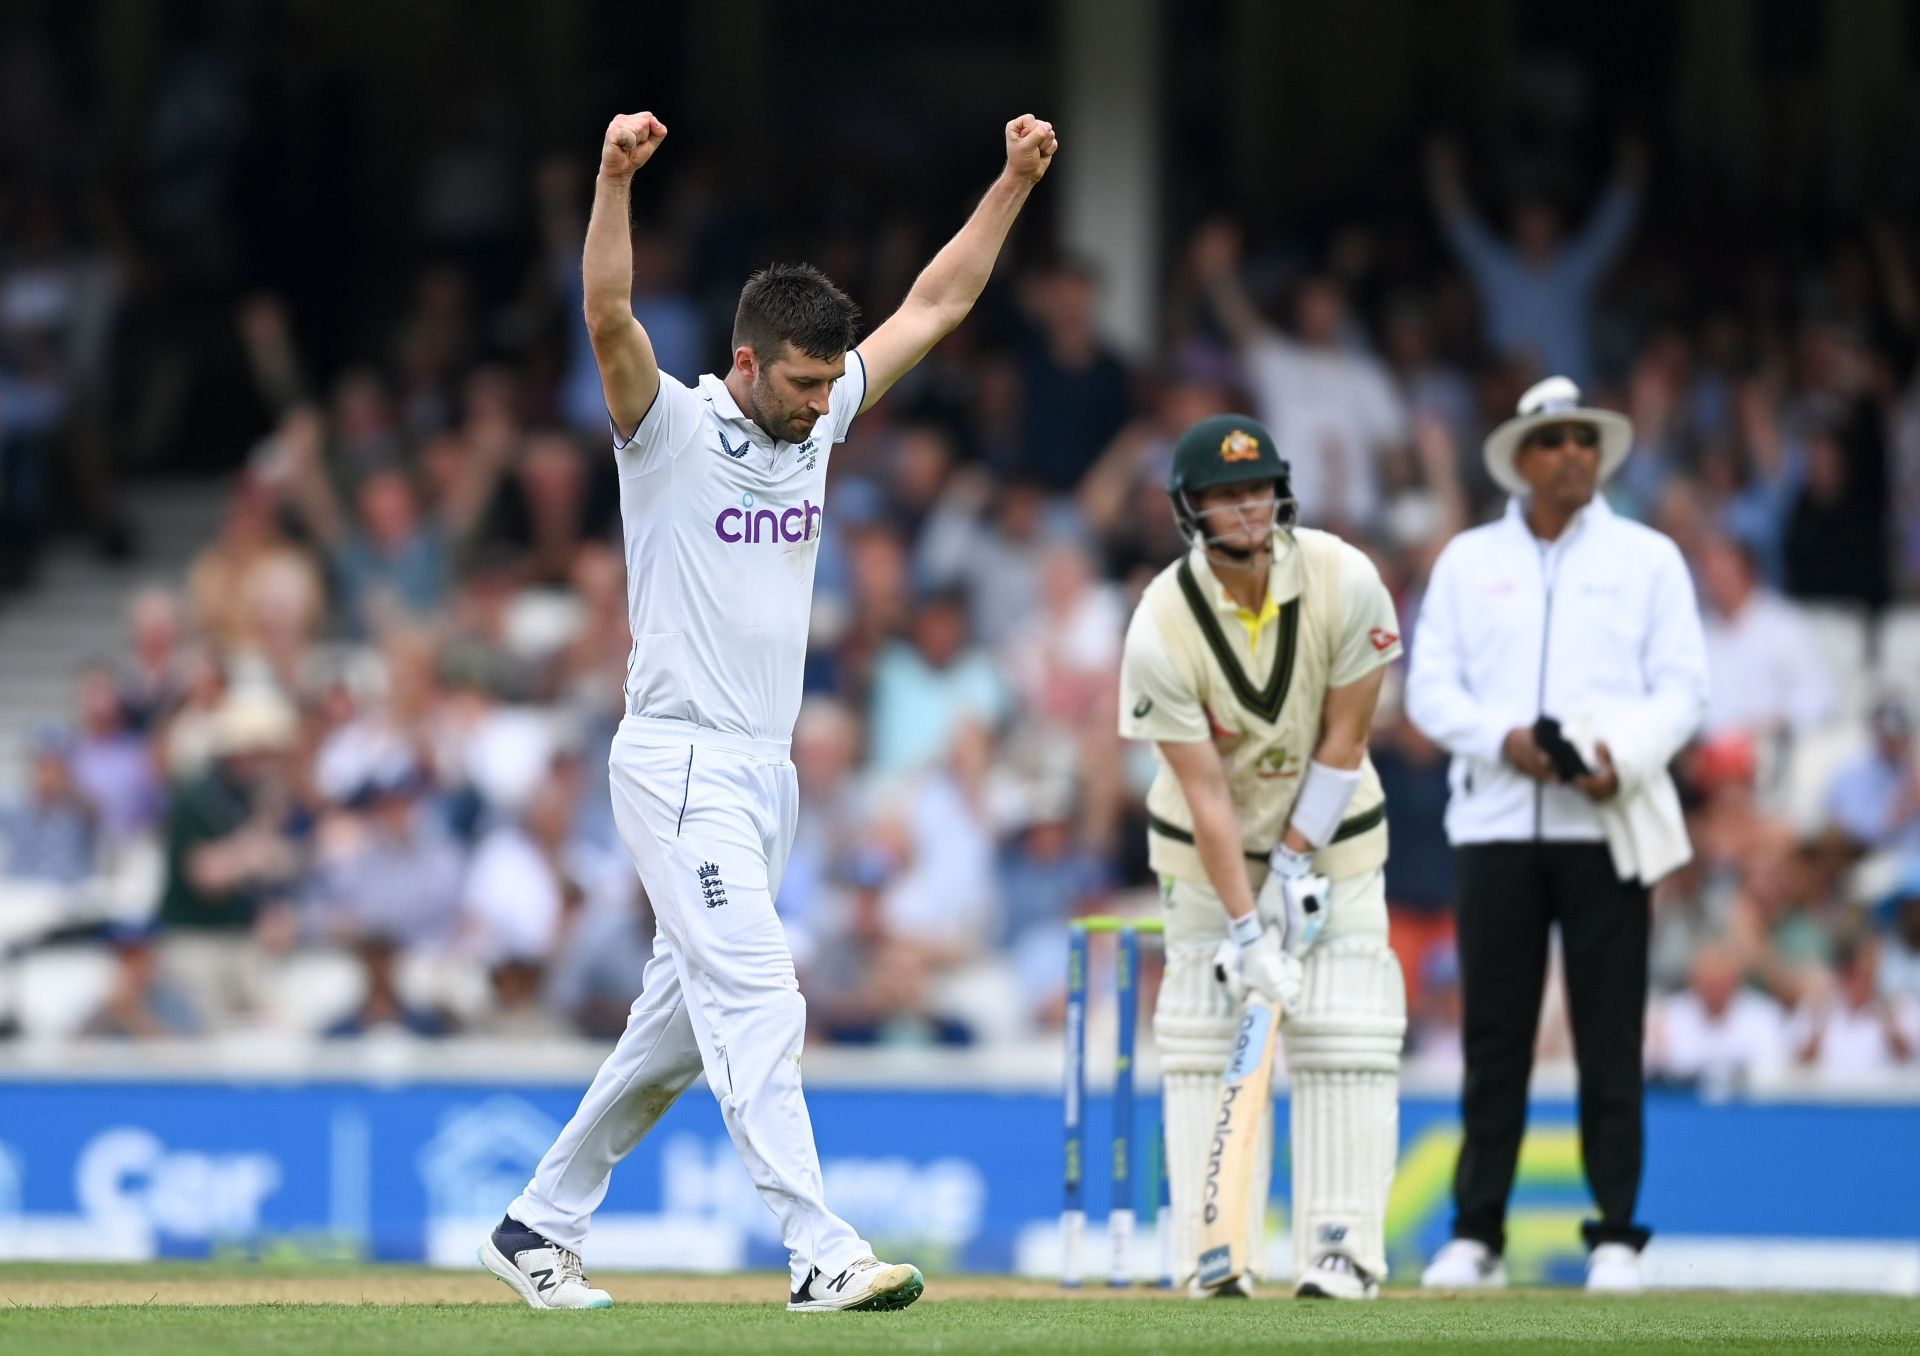 England&rsquo;s fast bowlers have had the upper hand over Australia&rsquo;s batters in recent Tests. (Pic: Getty Images)